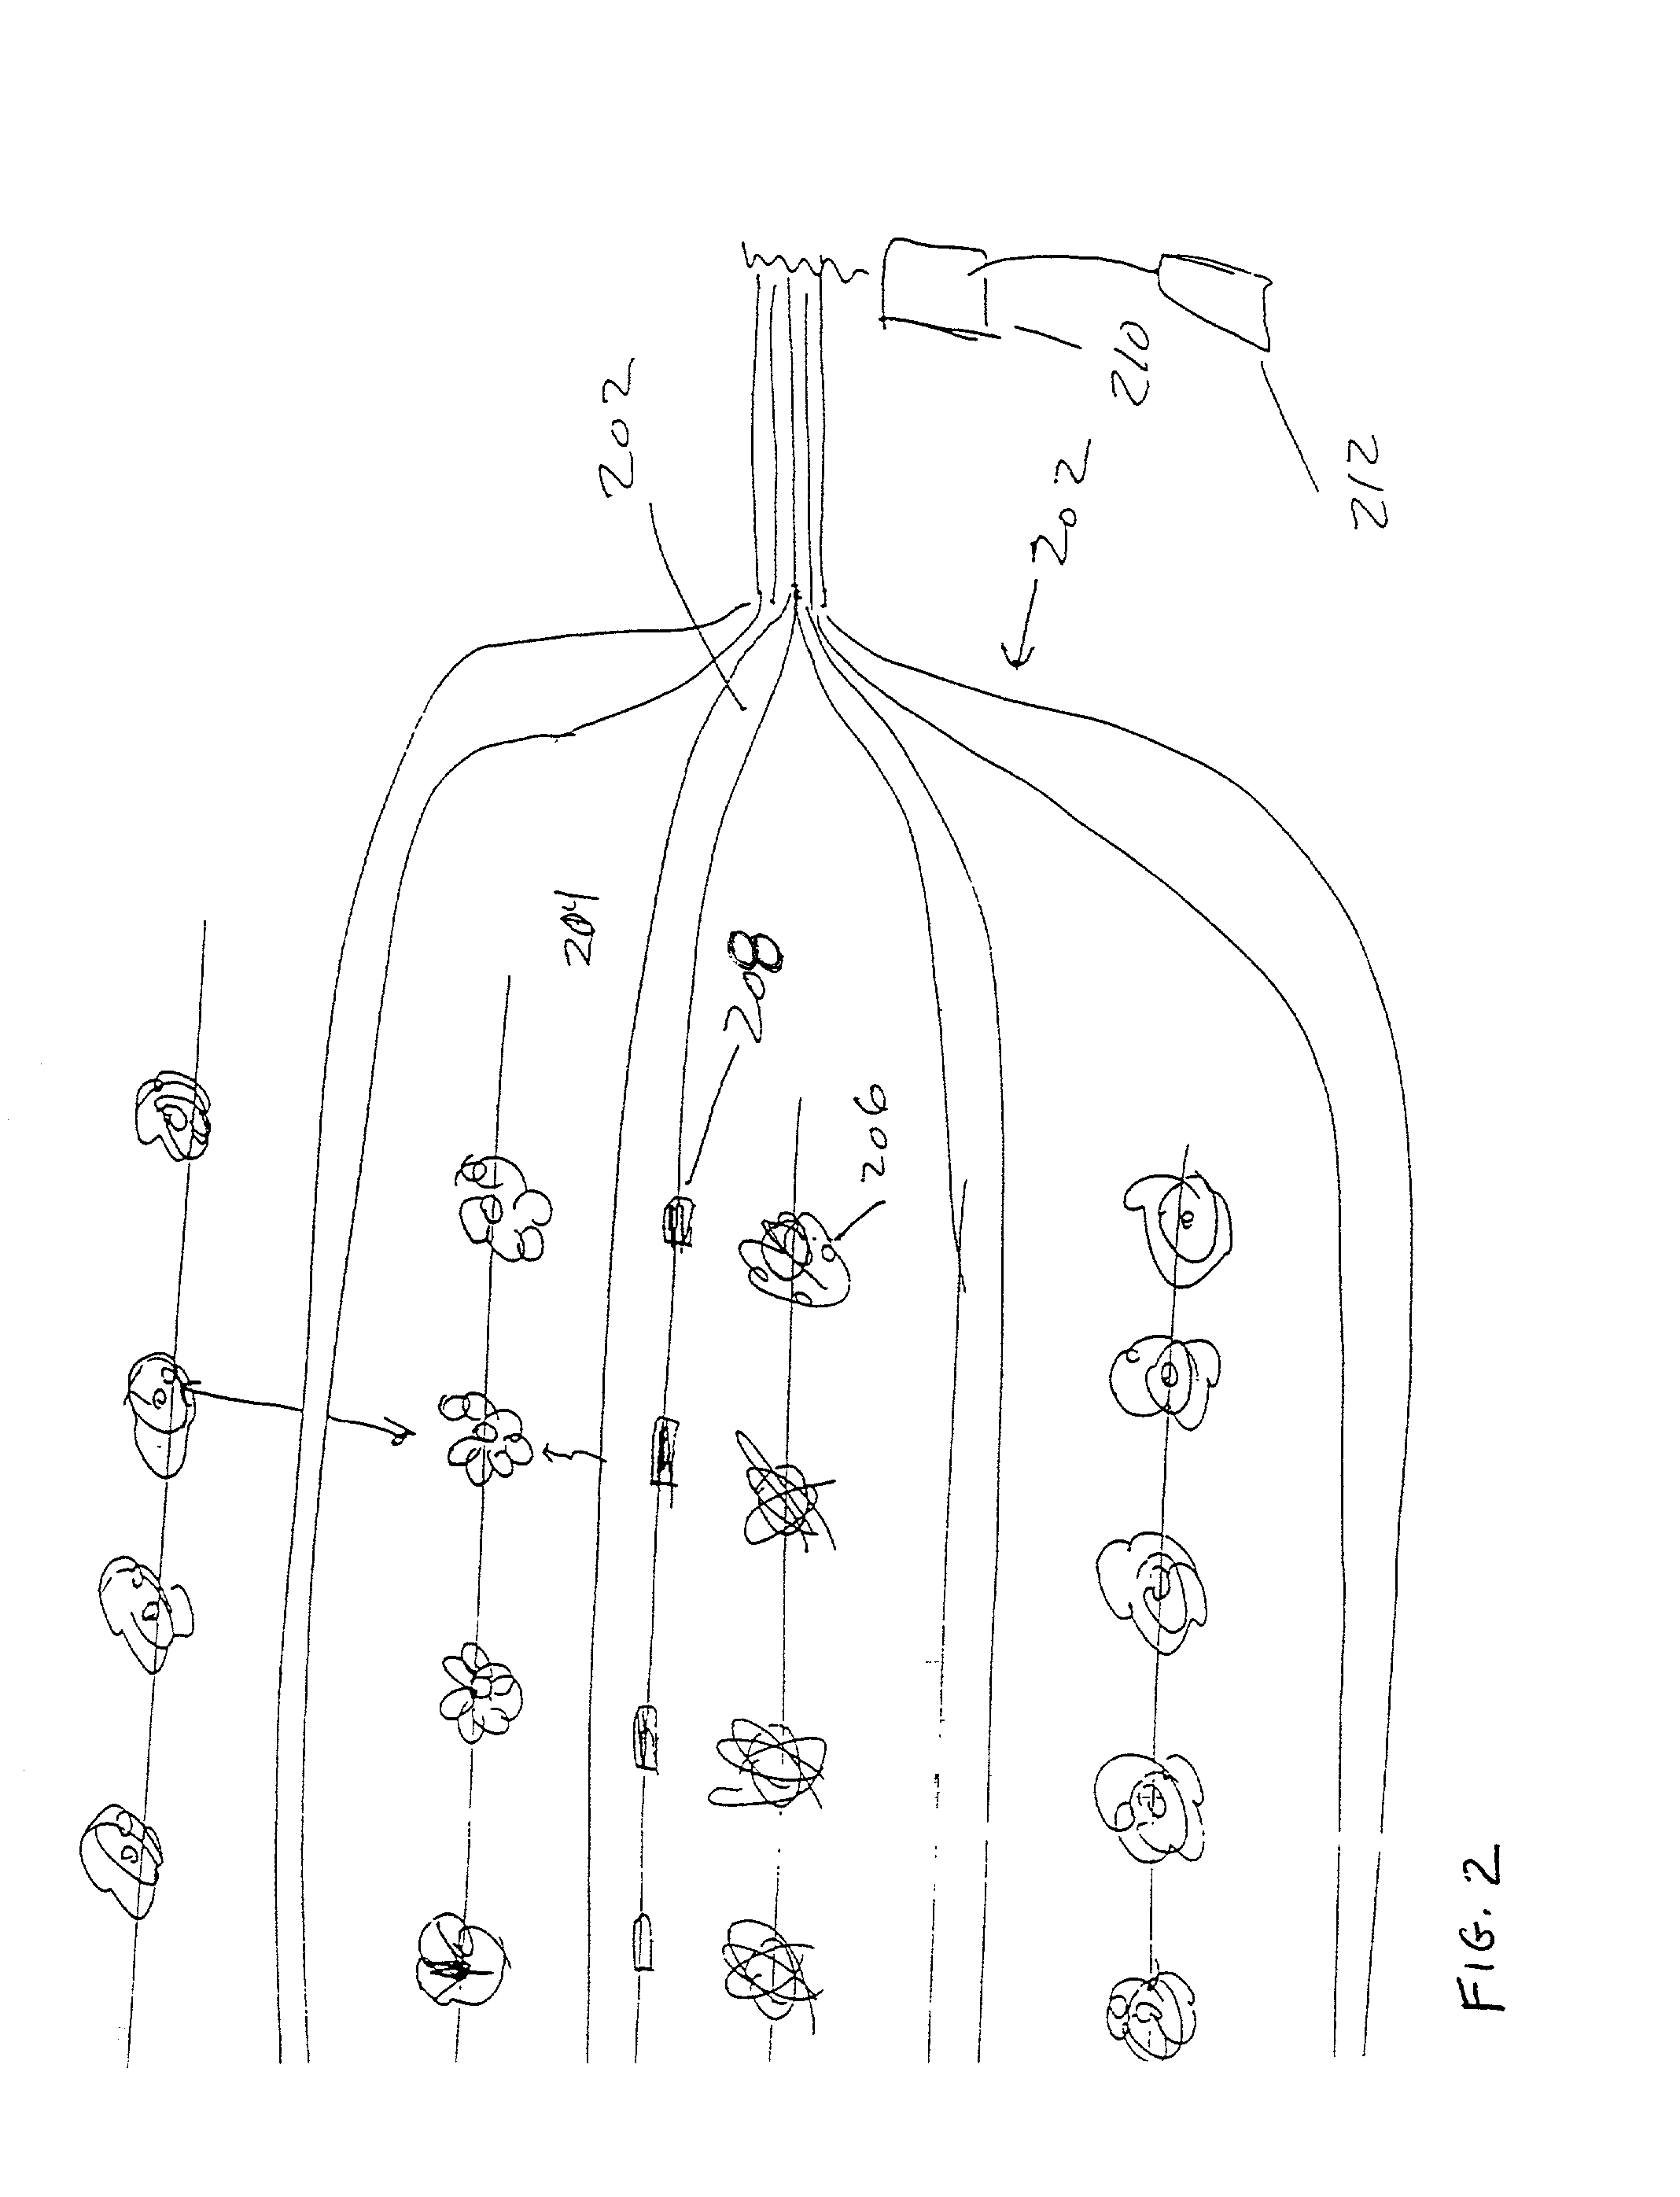 Fiber assisted irradiation system and method for biostimulation